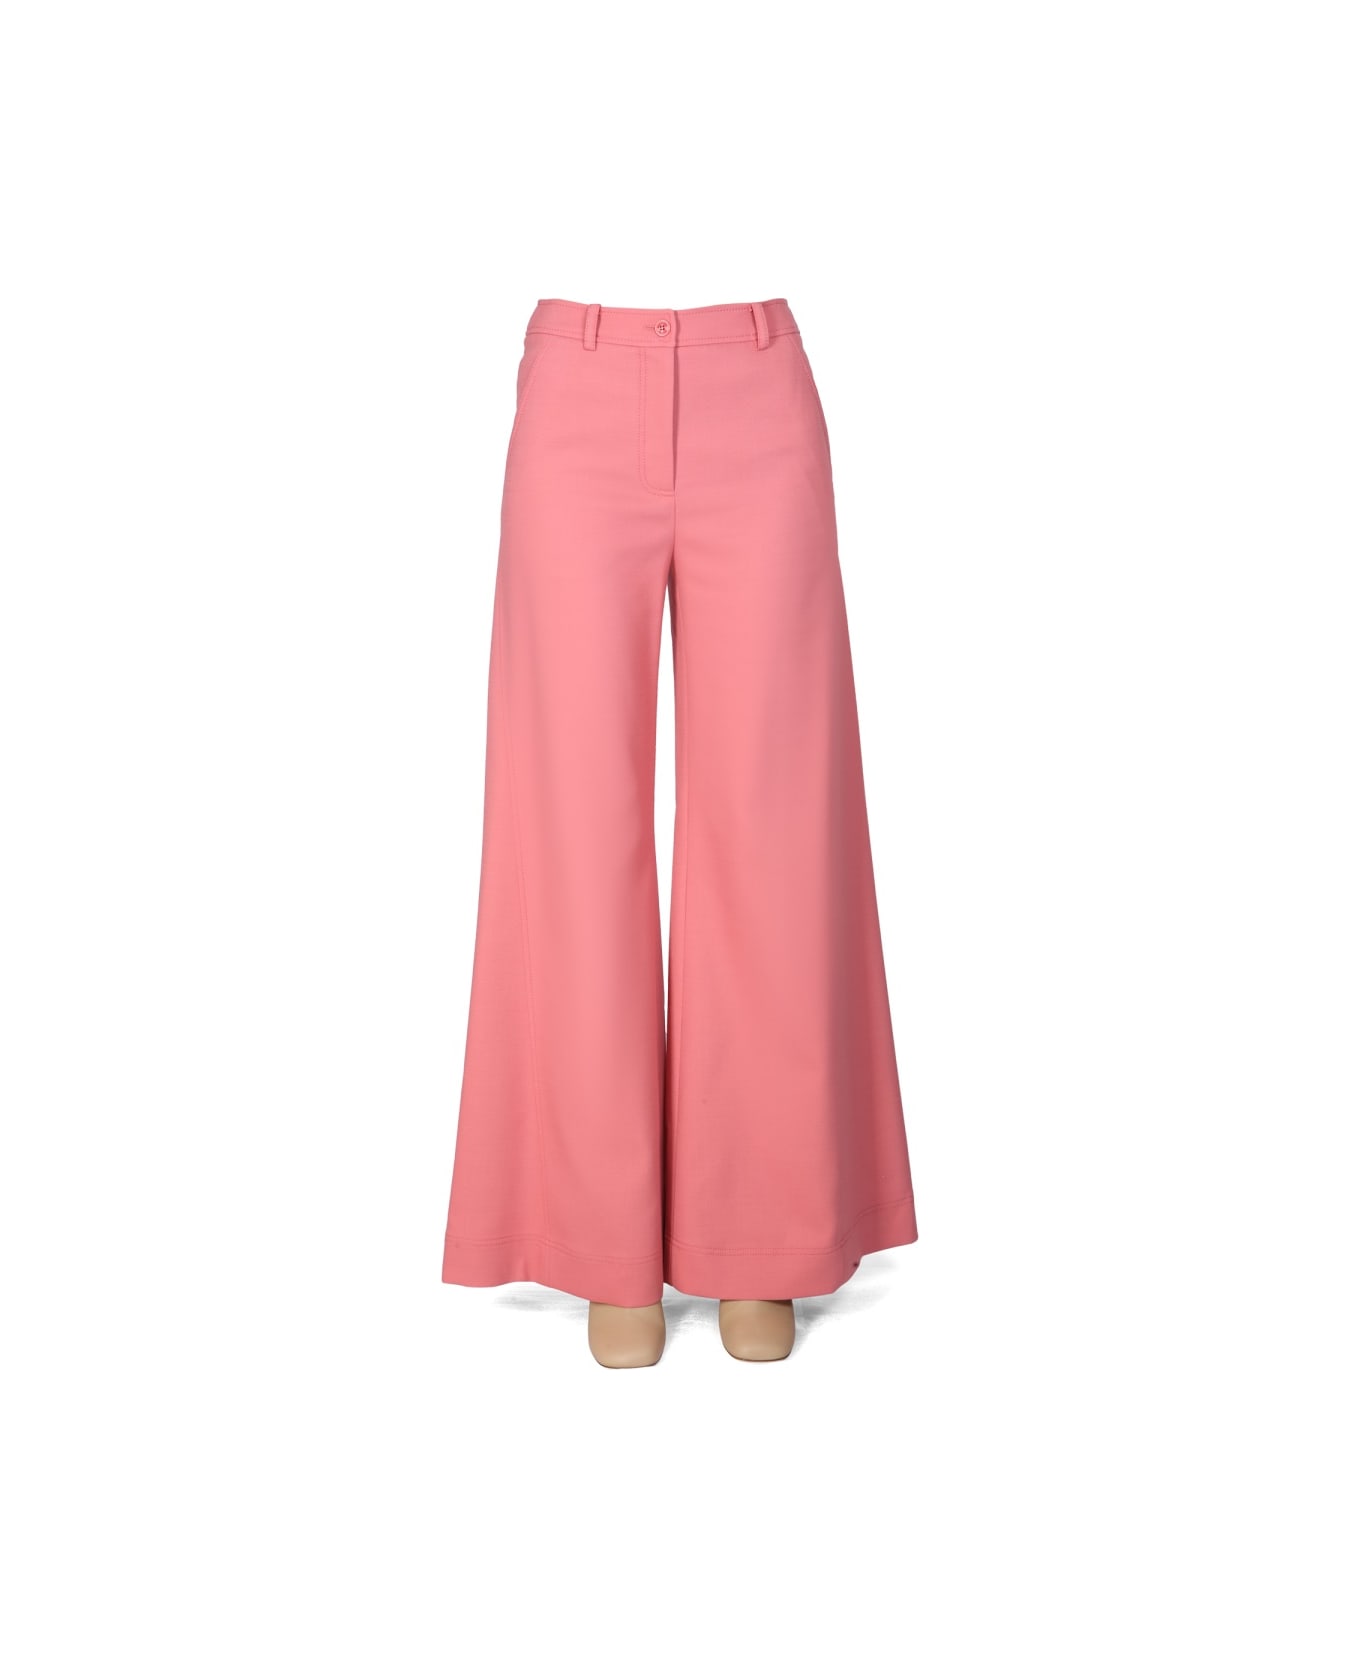 Boutique Moschino Chic Flare Pants - PINK